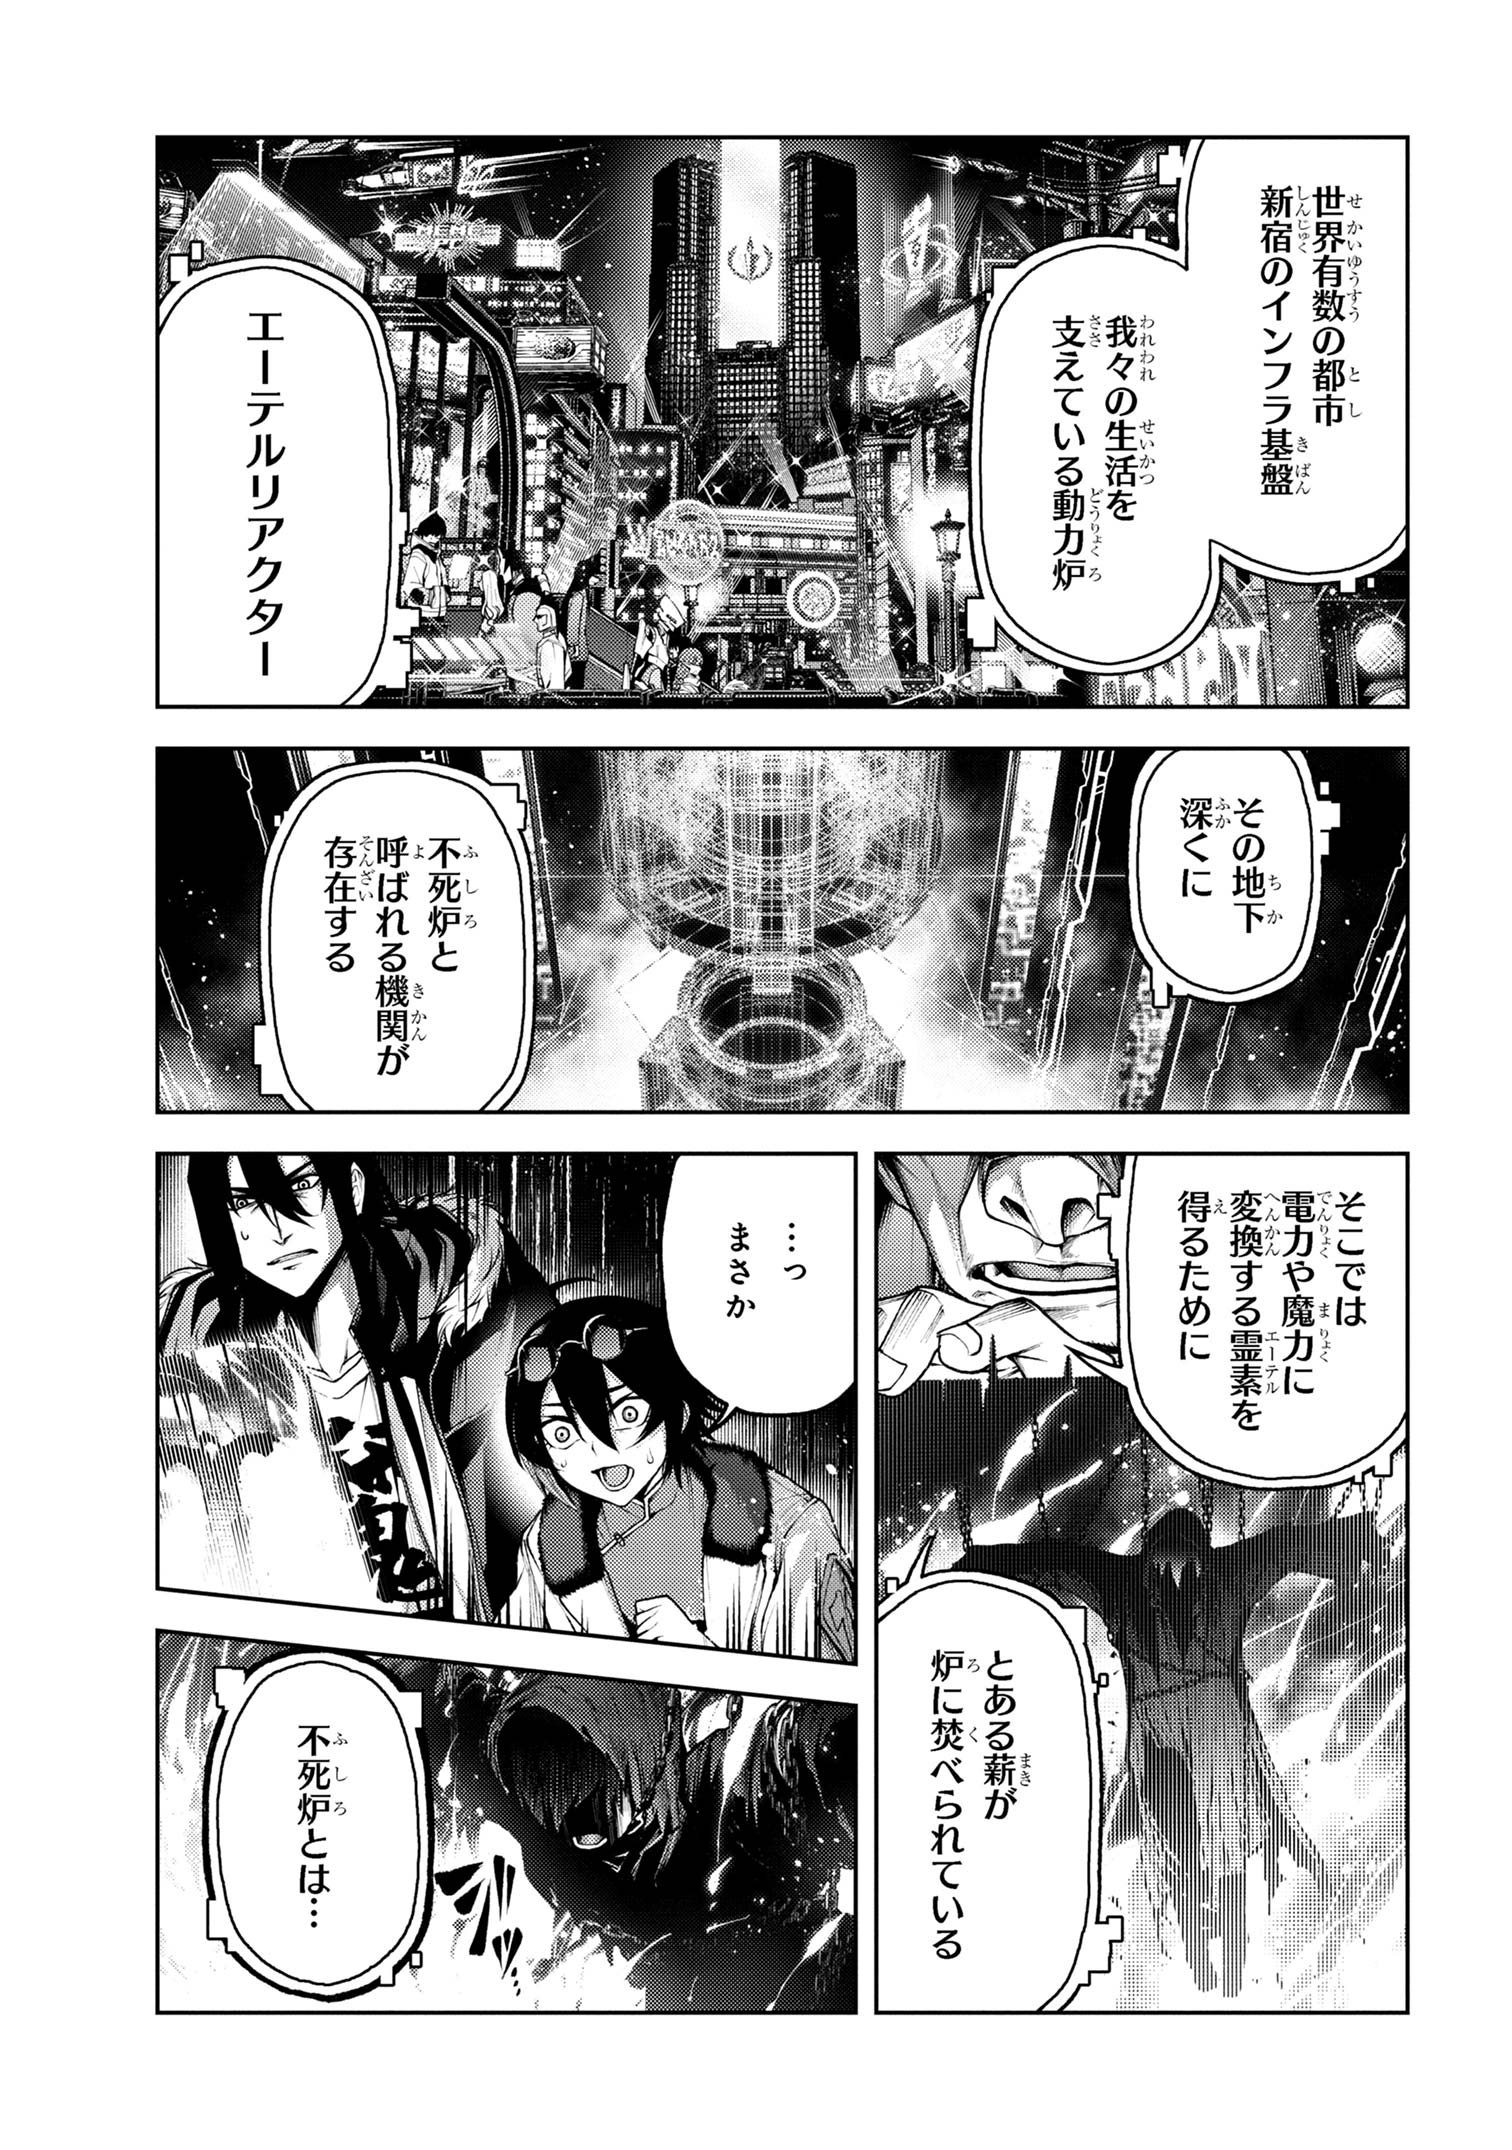 Maou 2099 - Chapter 7.2 - Page 2